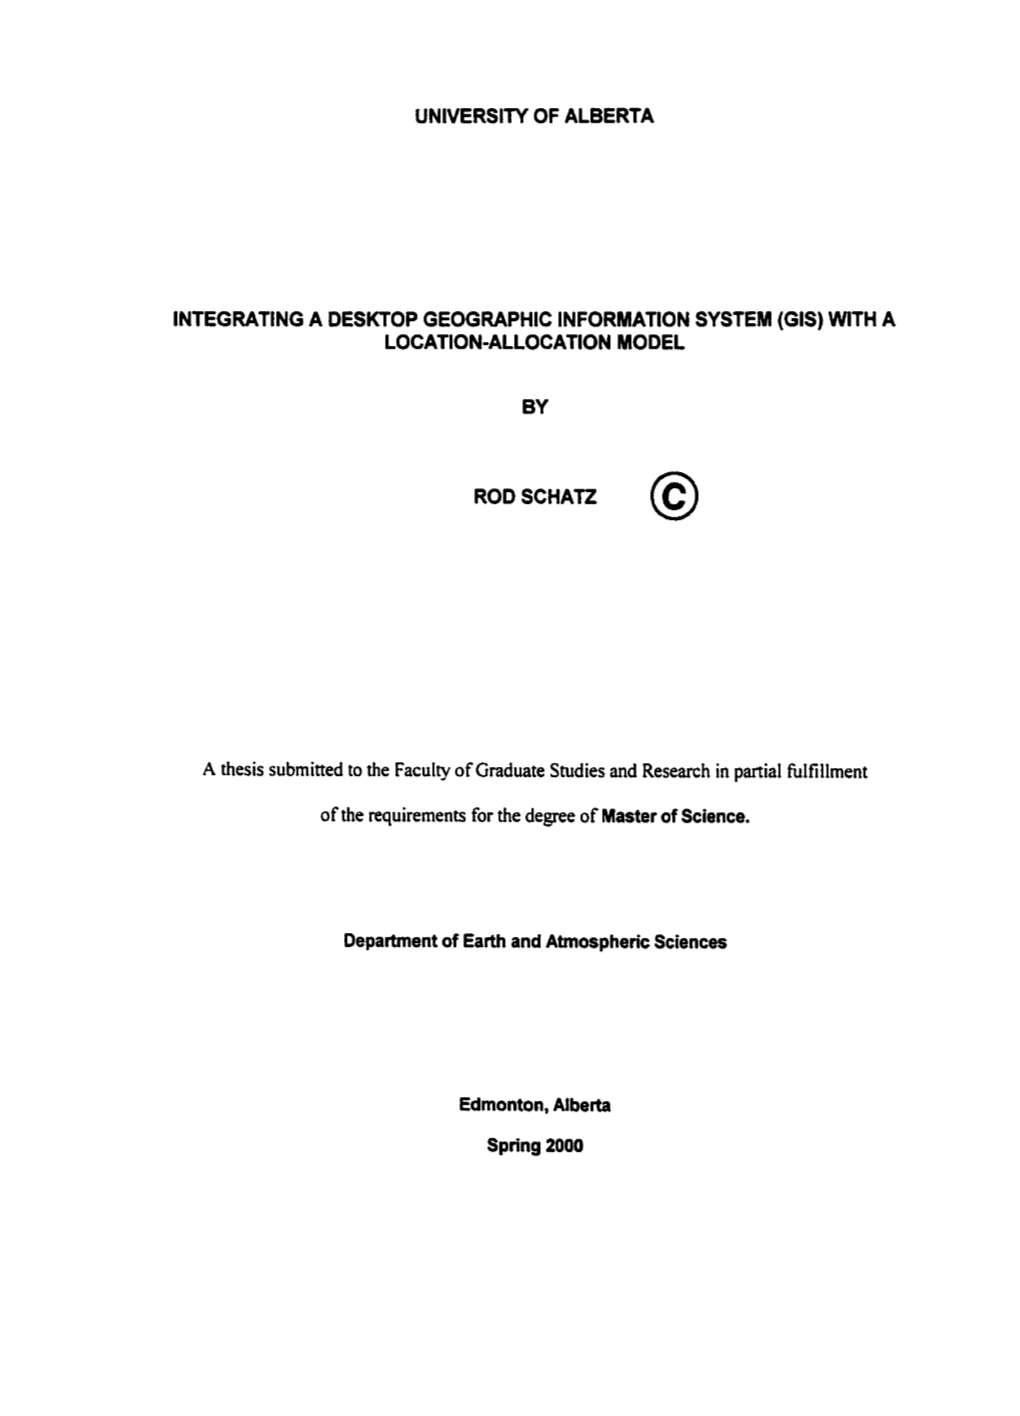 A Thesis Submitted to the Facuity of Graduate Studies and Resemh in Partial Fiil Filirnent